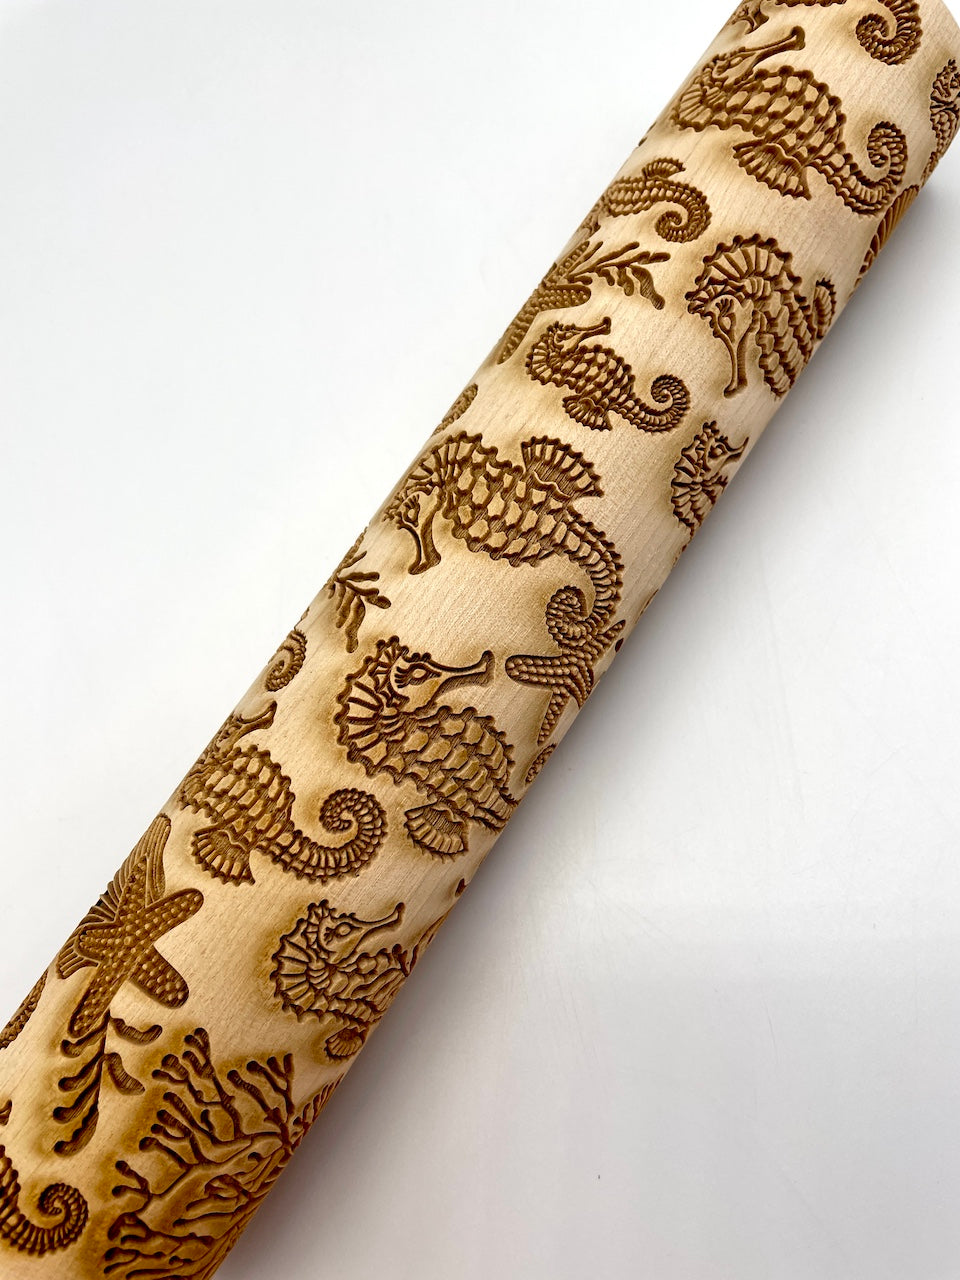 Seahorse Textured Rolling Pin